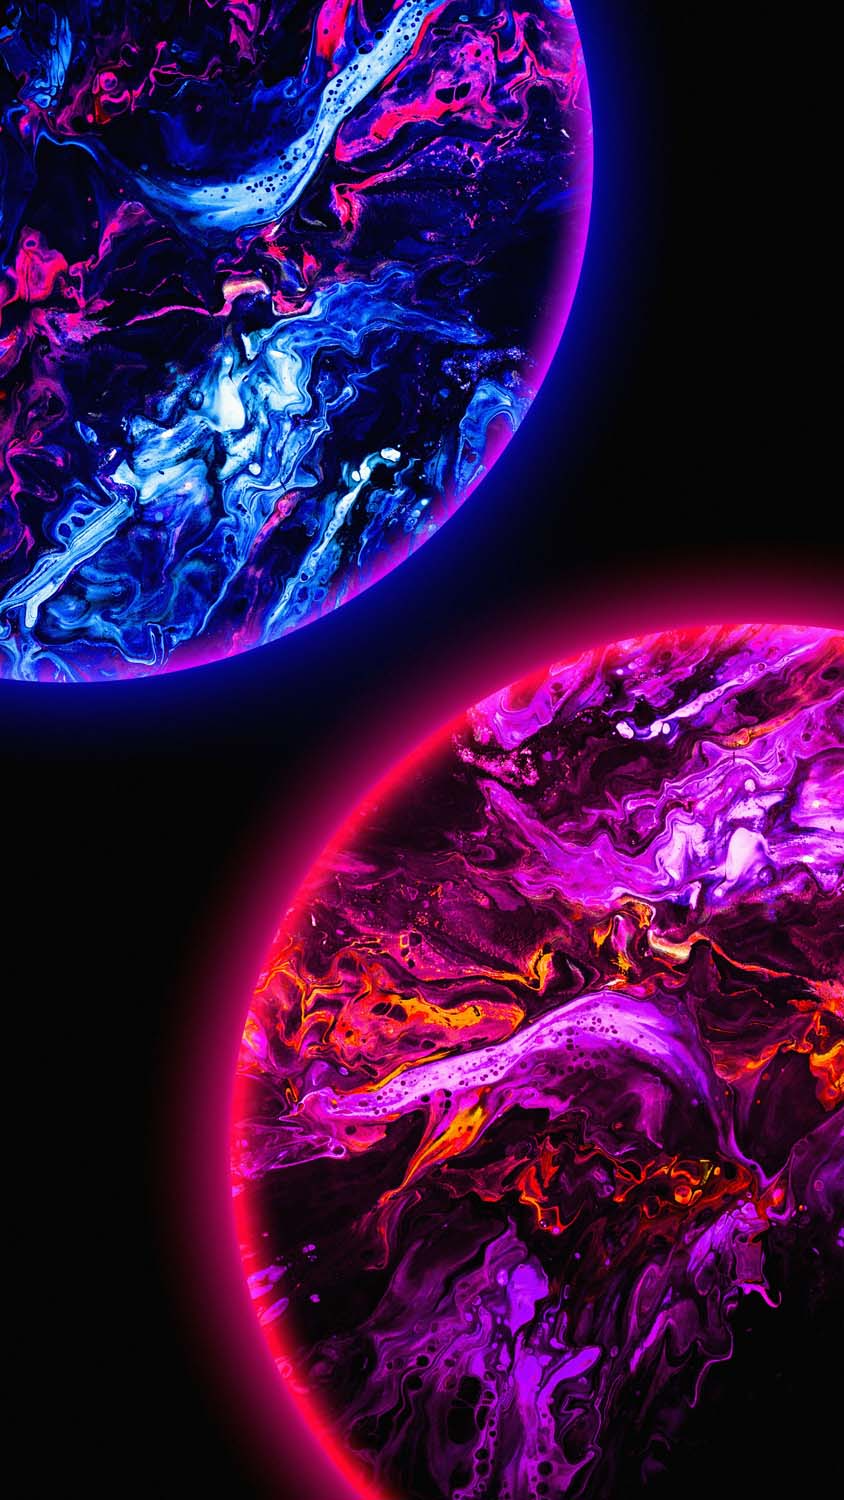 Amoled Planets IPhone Wallpaper HD  IPhone Wallpapers